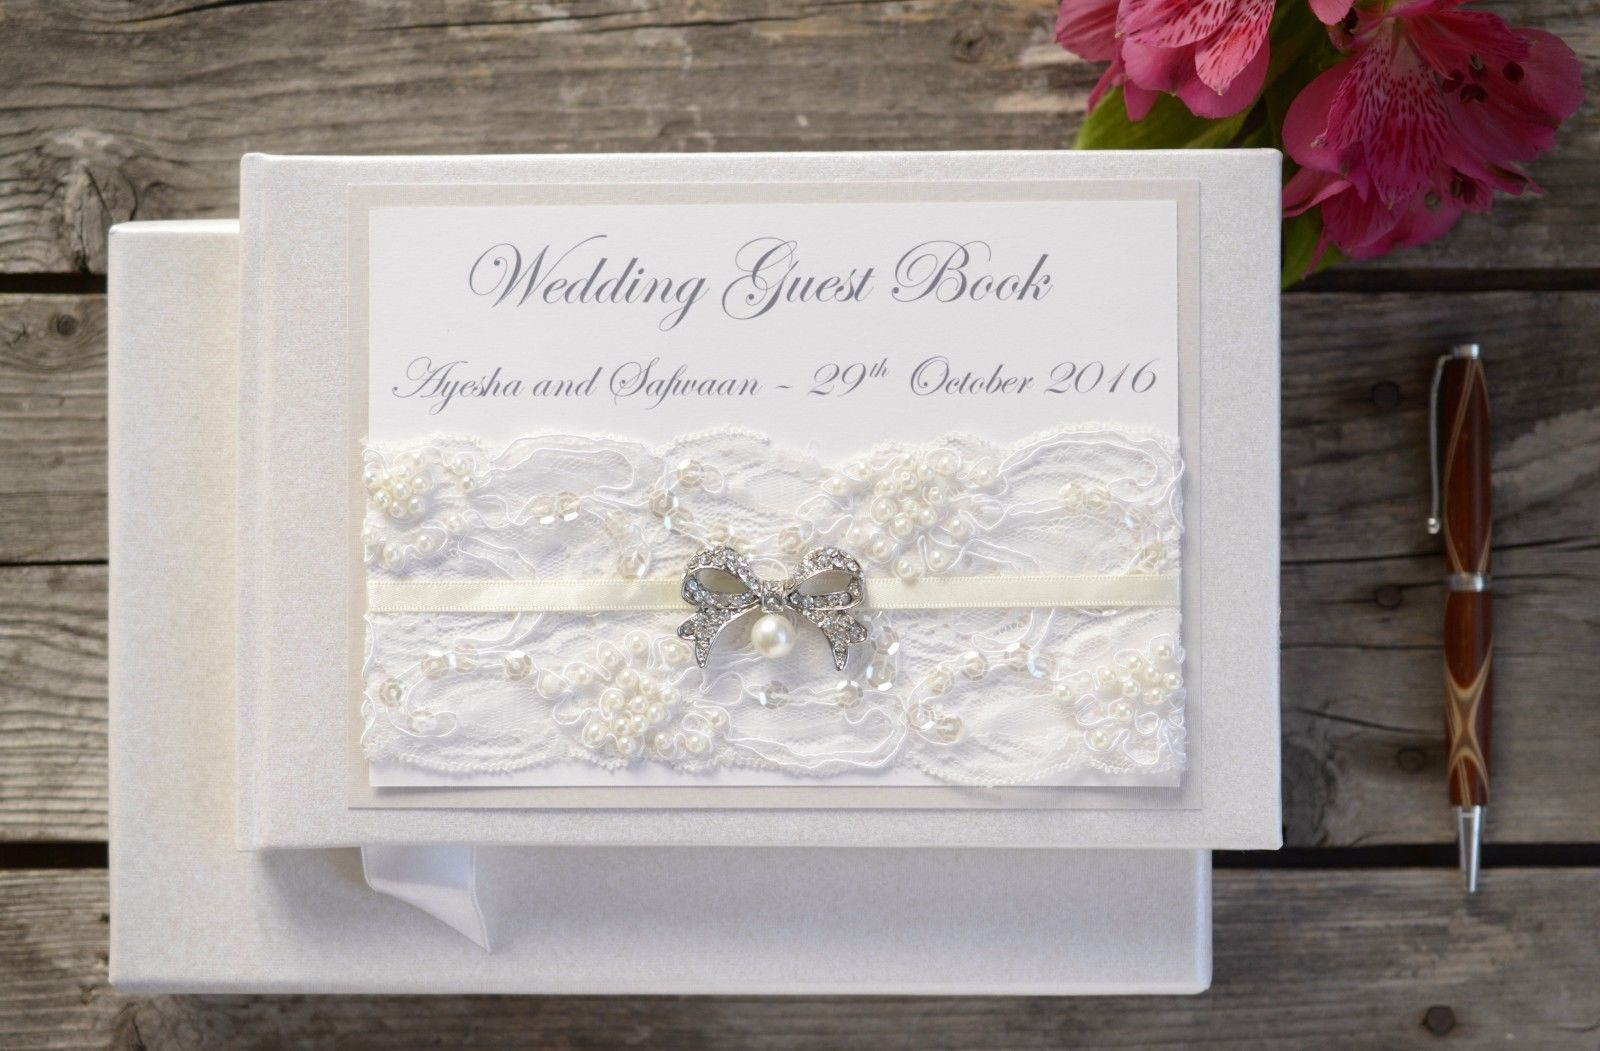 Luxury Wedding Guest Book
 Personalised Wedding Guest Book – Luxury Ivory Beaded Lace